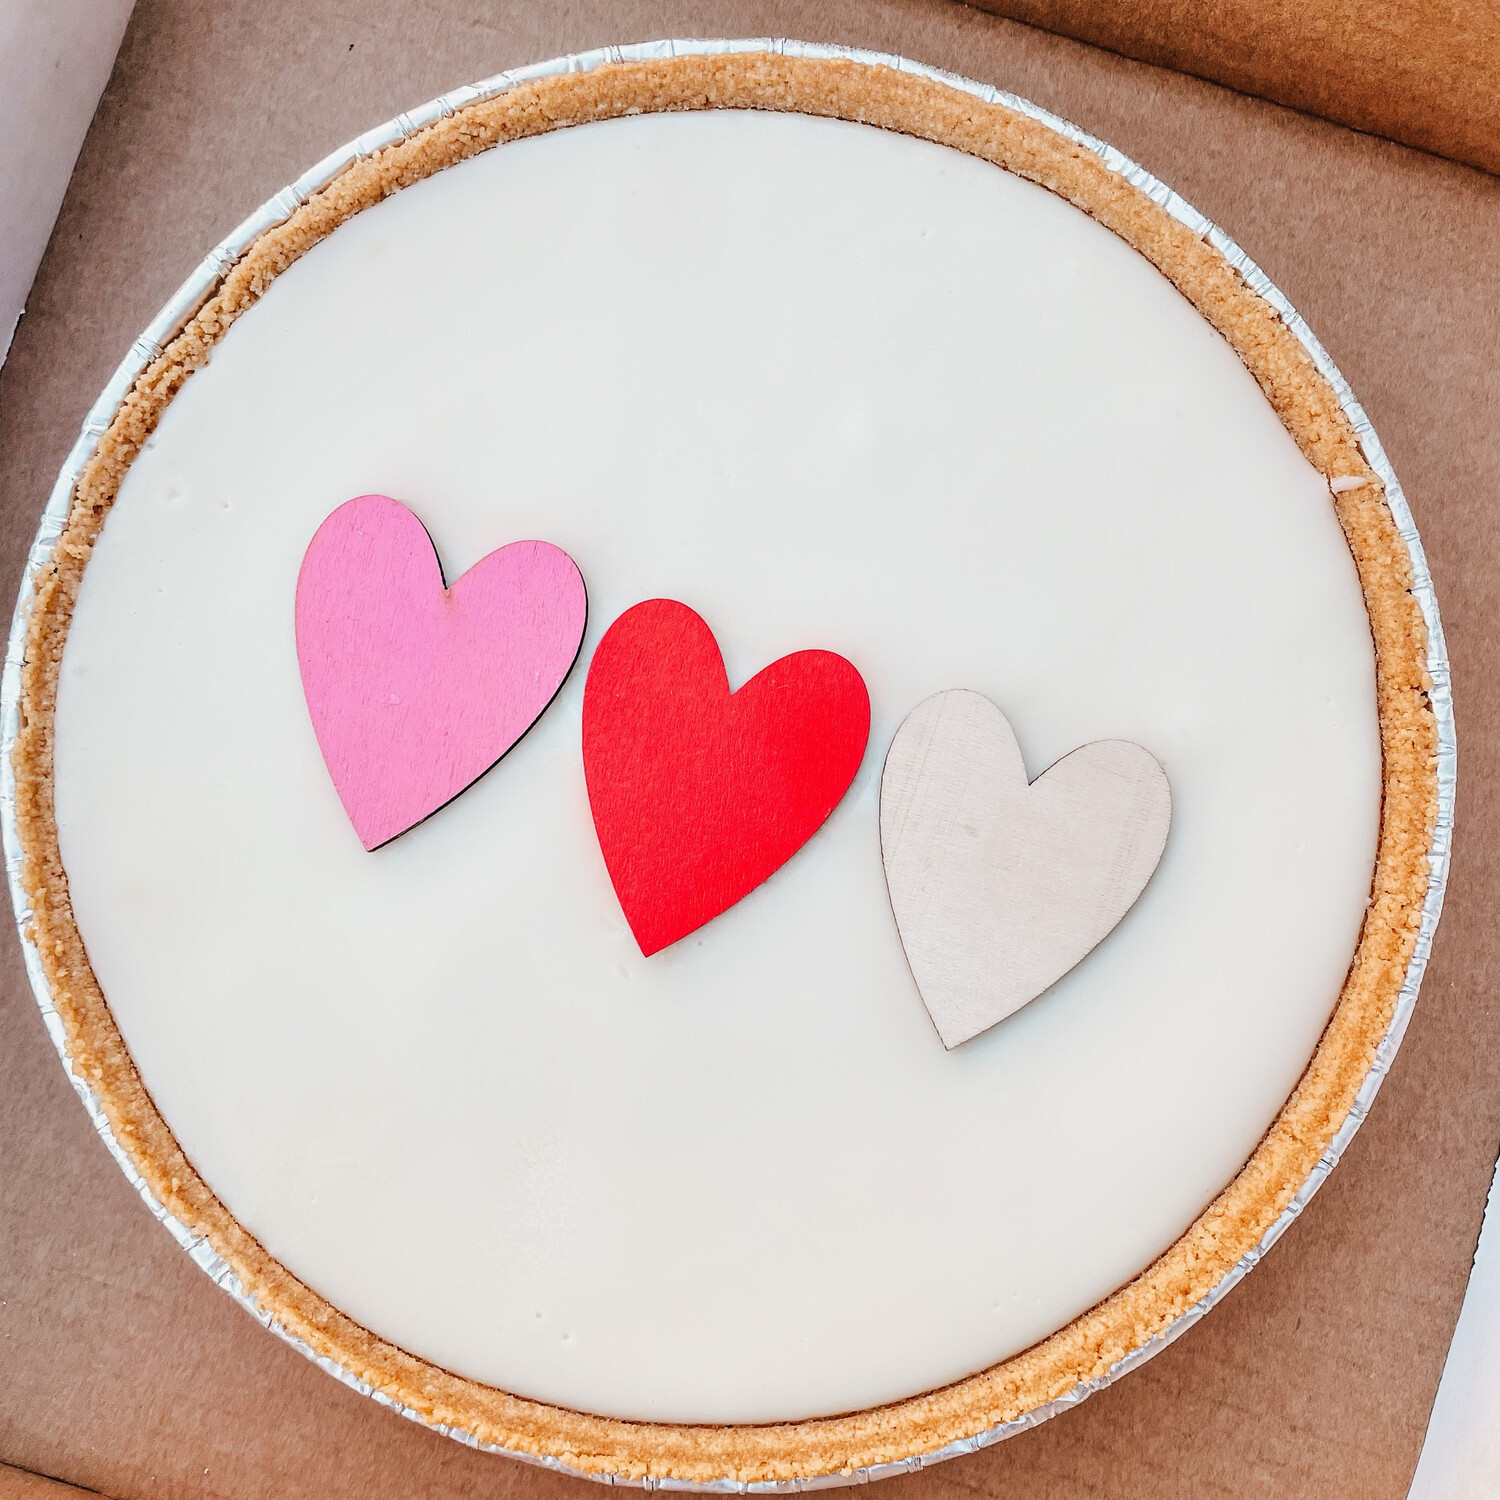 For Him 9” Big Heart Pie